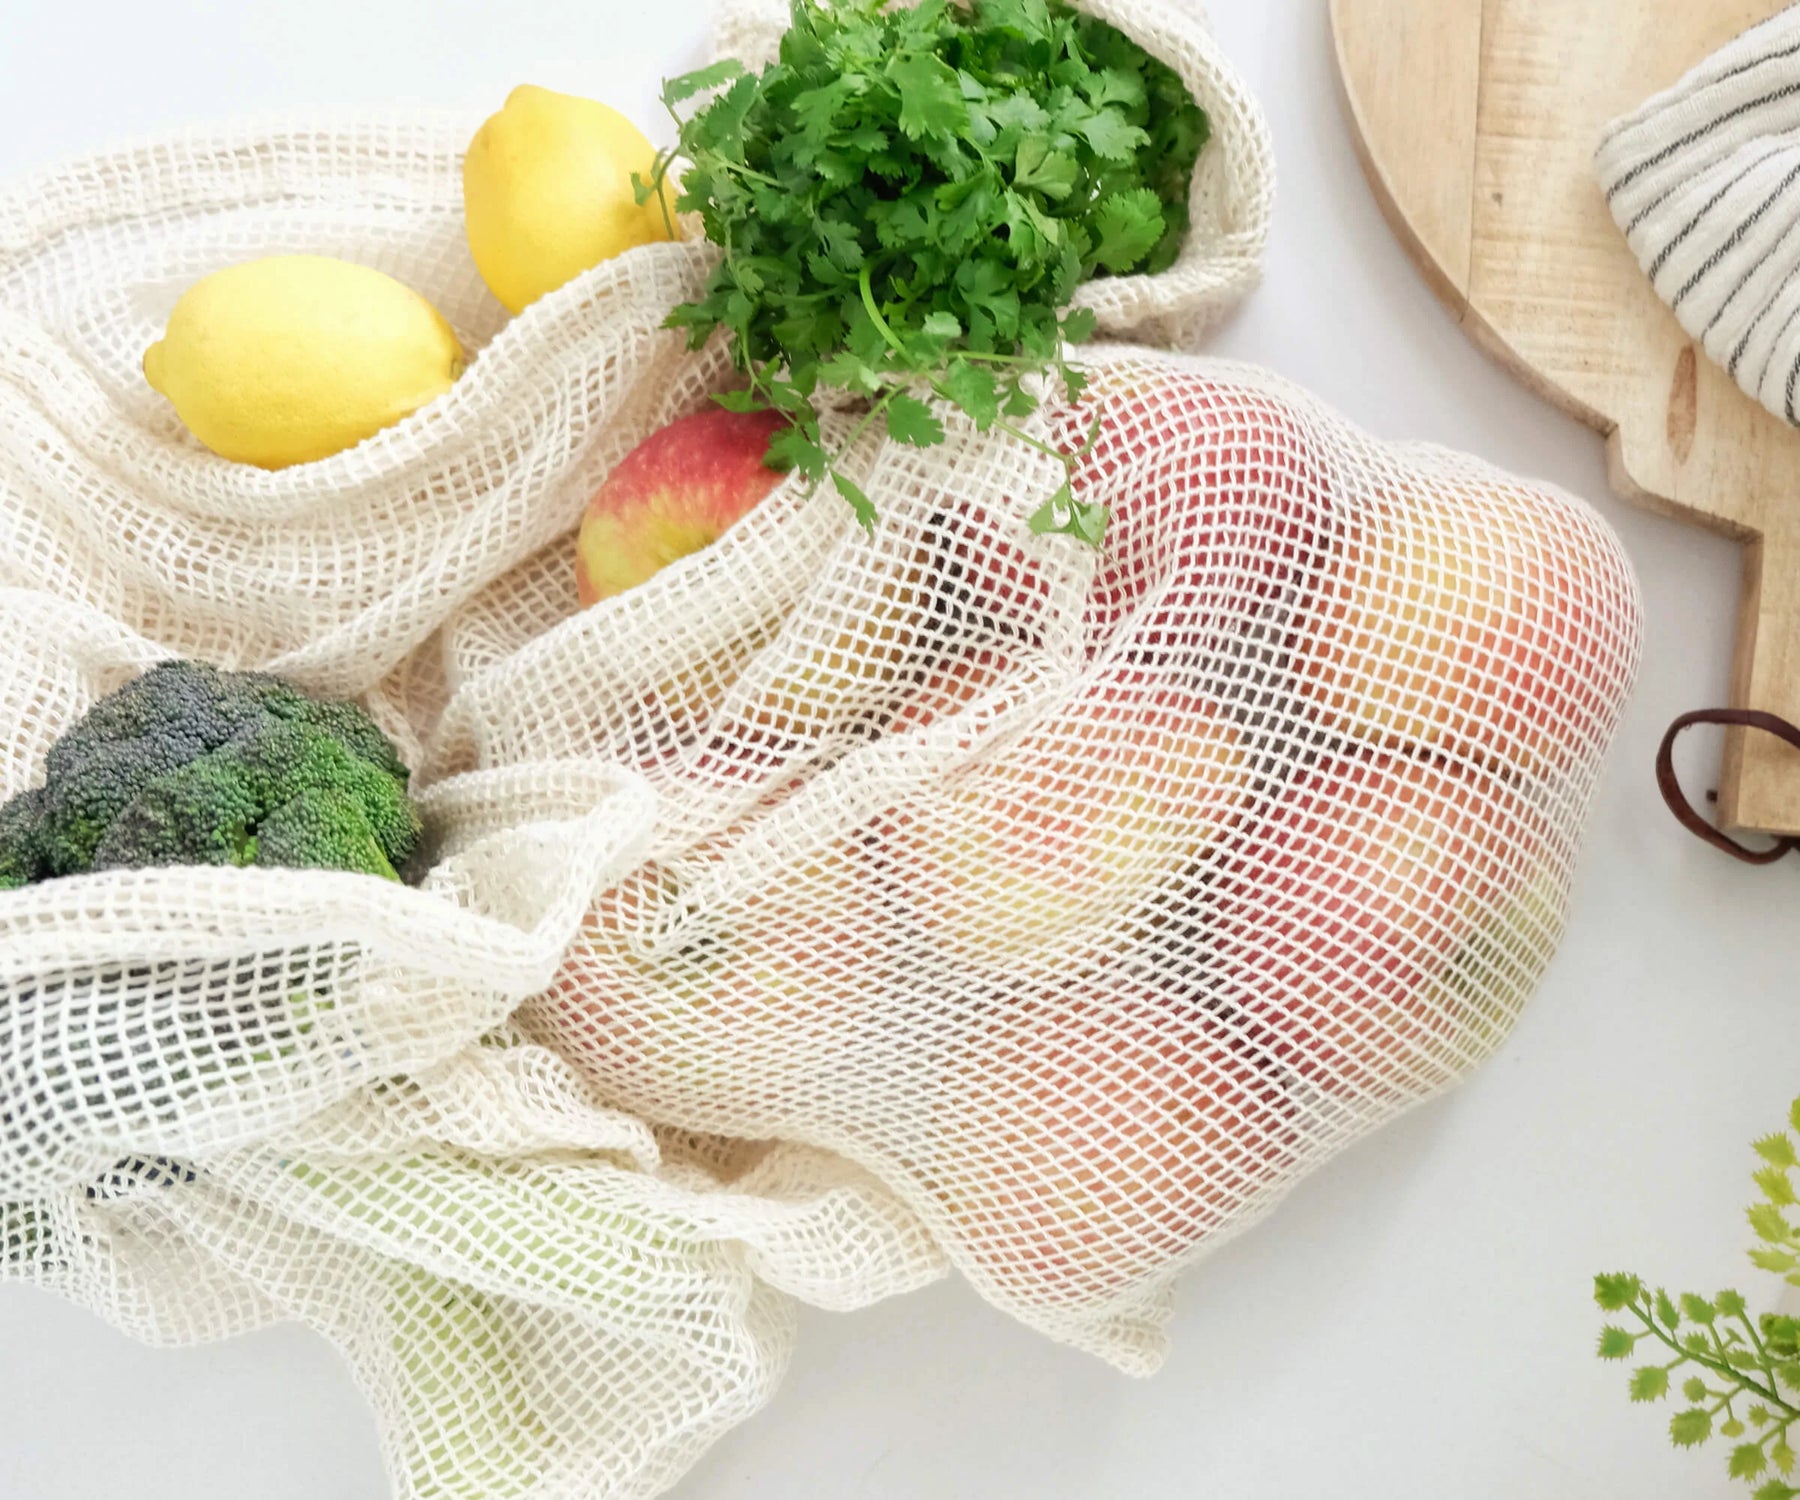 reusable mesh produce bags net bags for produce netting bag store, reusable produce bags, reusable grocery bags produce bags, reusable grocery shopping bags